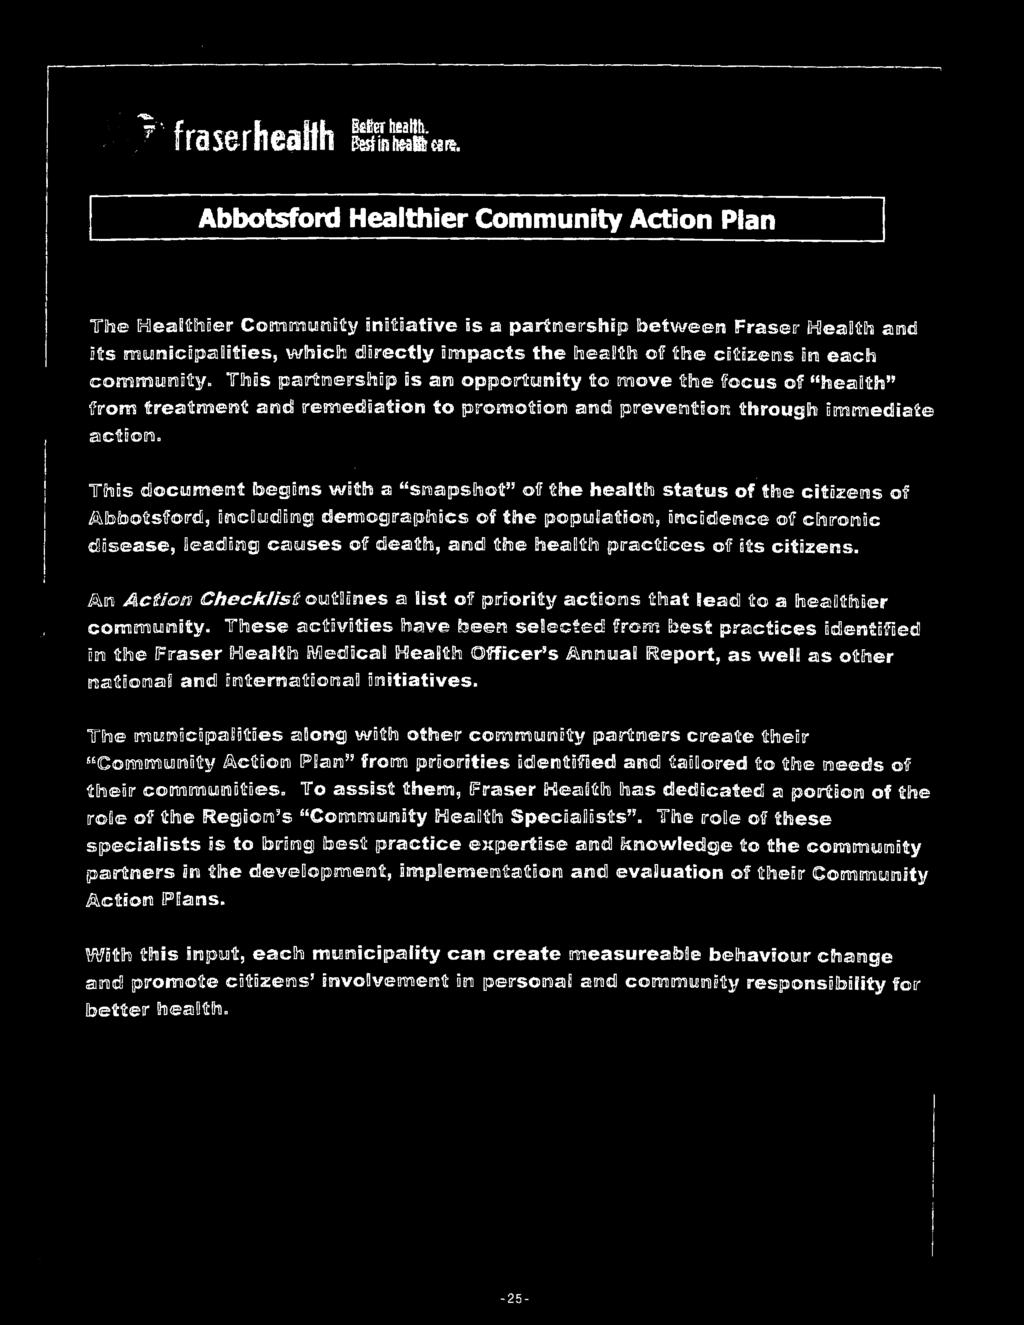 This document begins with a "snapshot" of the health status of the citizens of Abbotsford, including demographics of the population, incidence of chronic disease, leading causes of death, and the